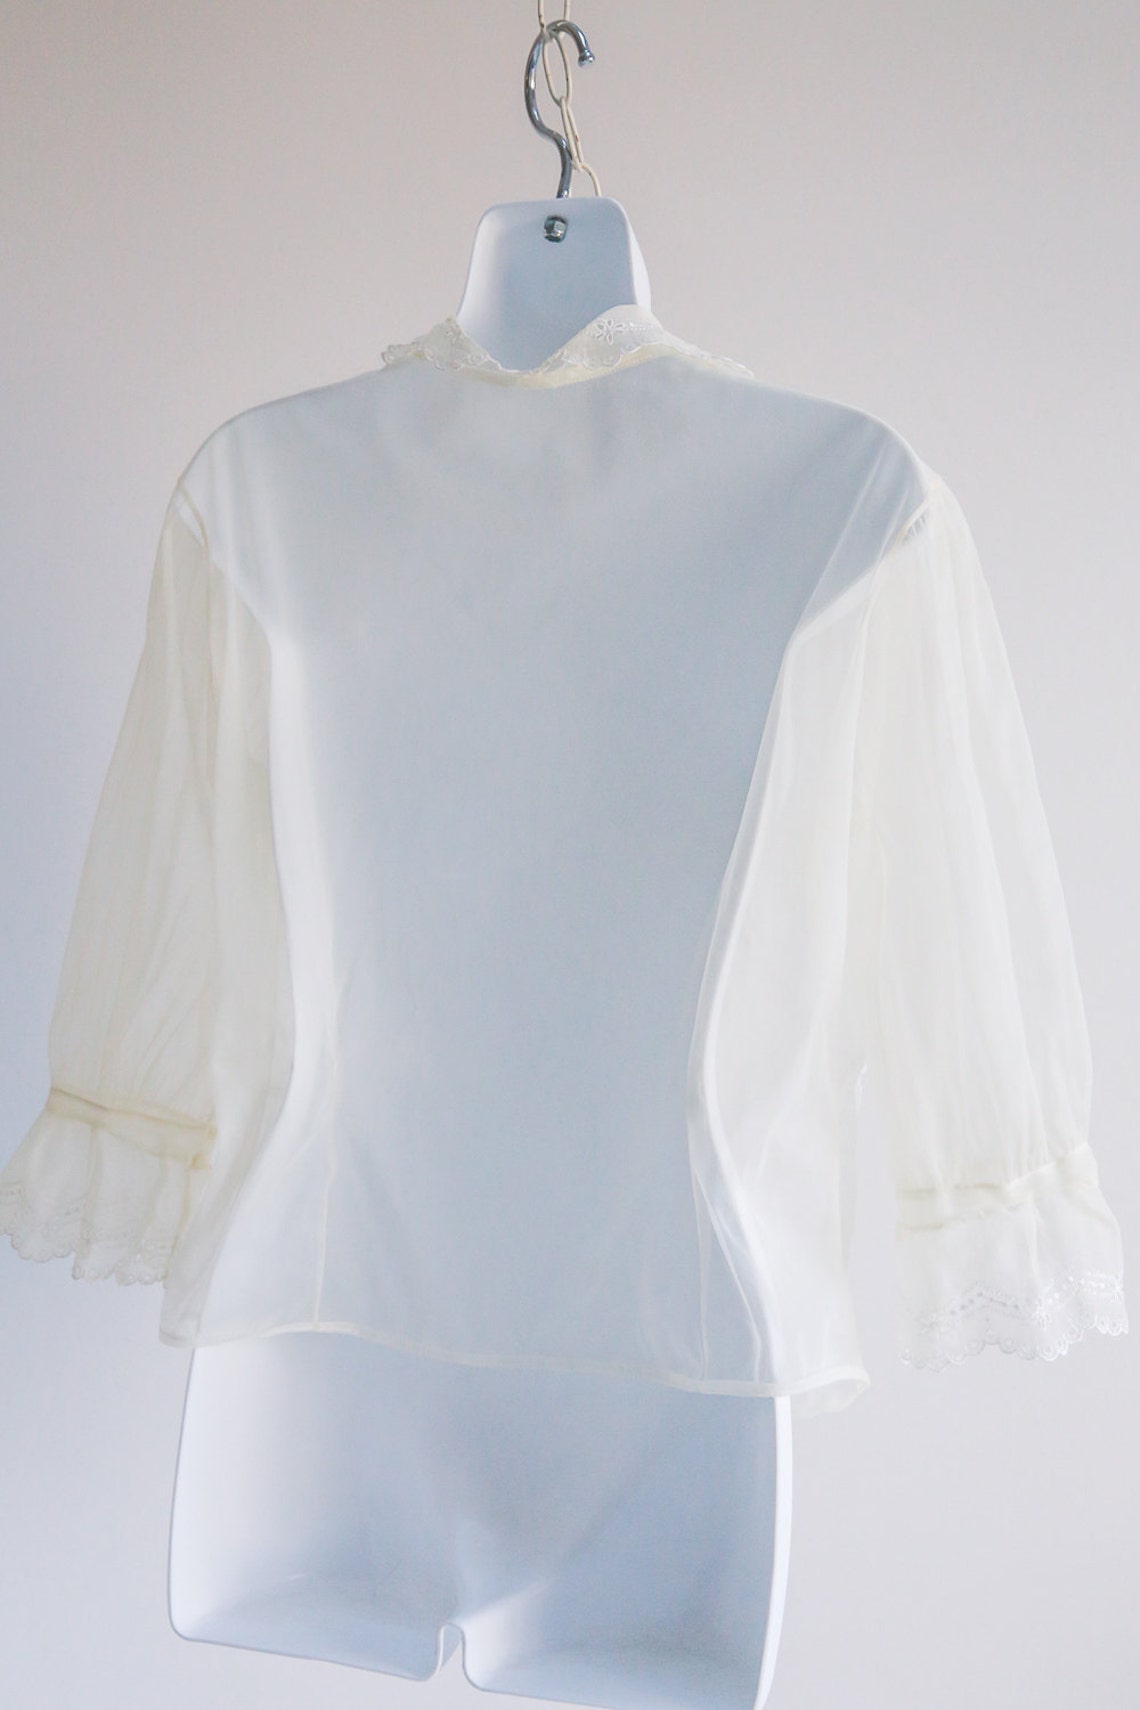 Eyelet Lace Sheer Blouse With 3/4 Sleeves Sz M L - Etsy Canada